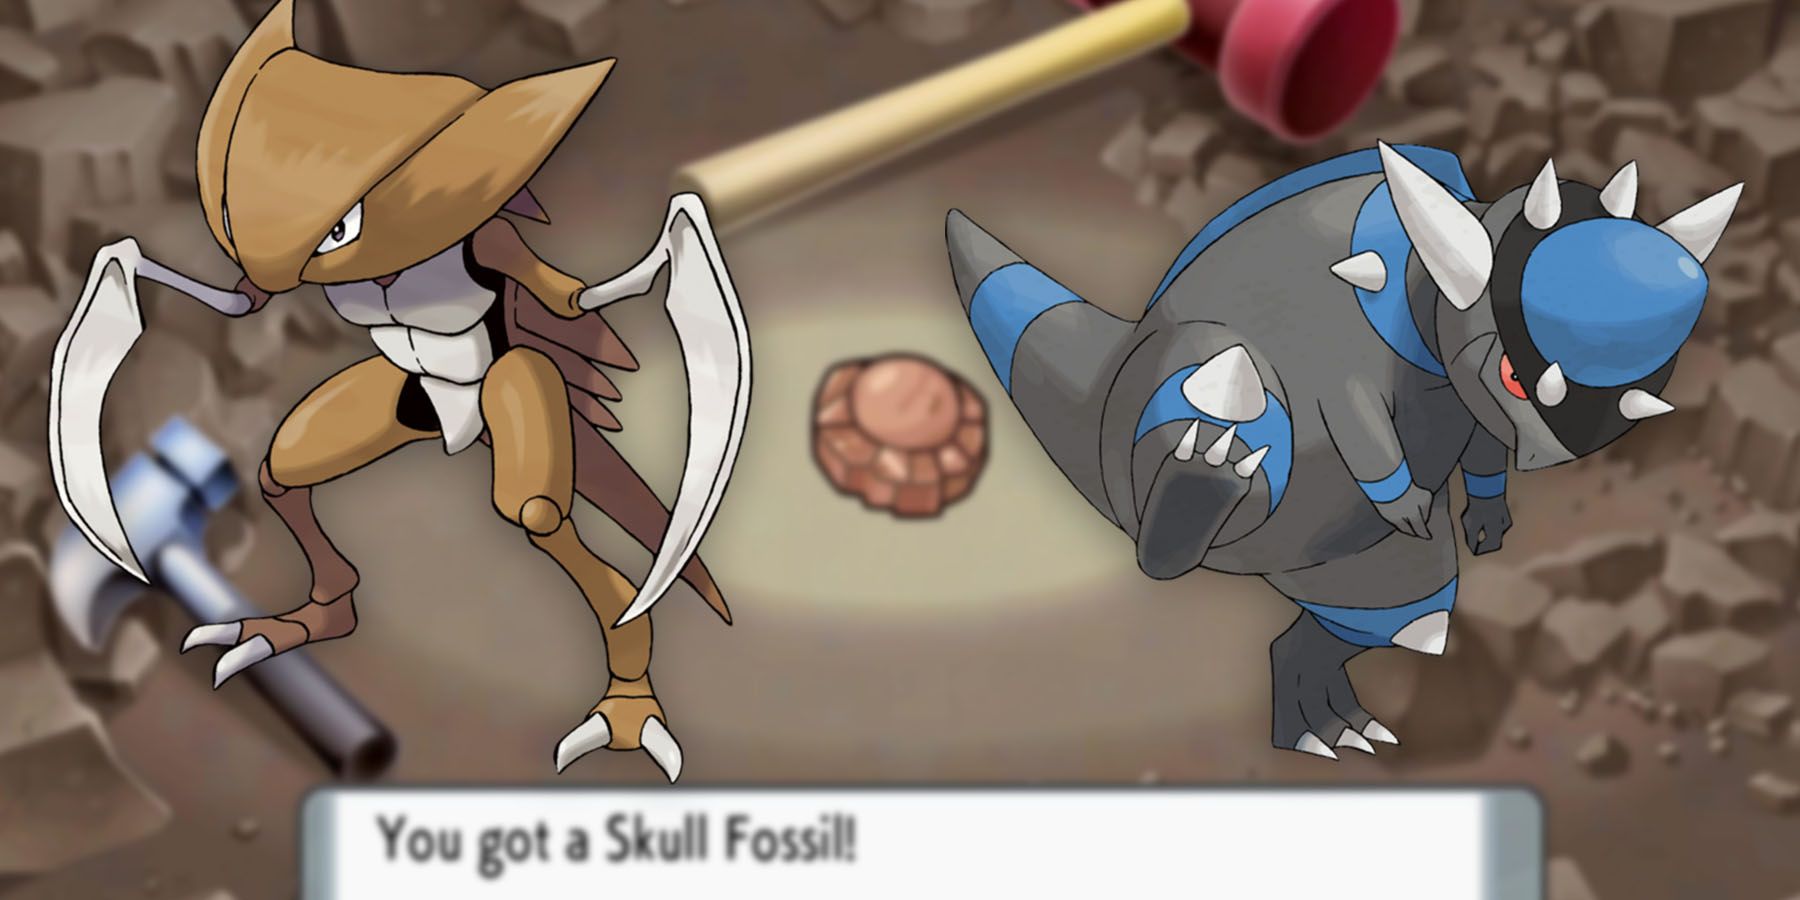 All the Fossil Pokemon in the Franchise So Far